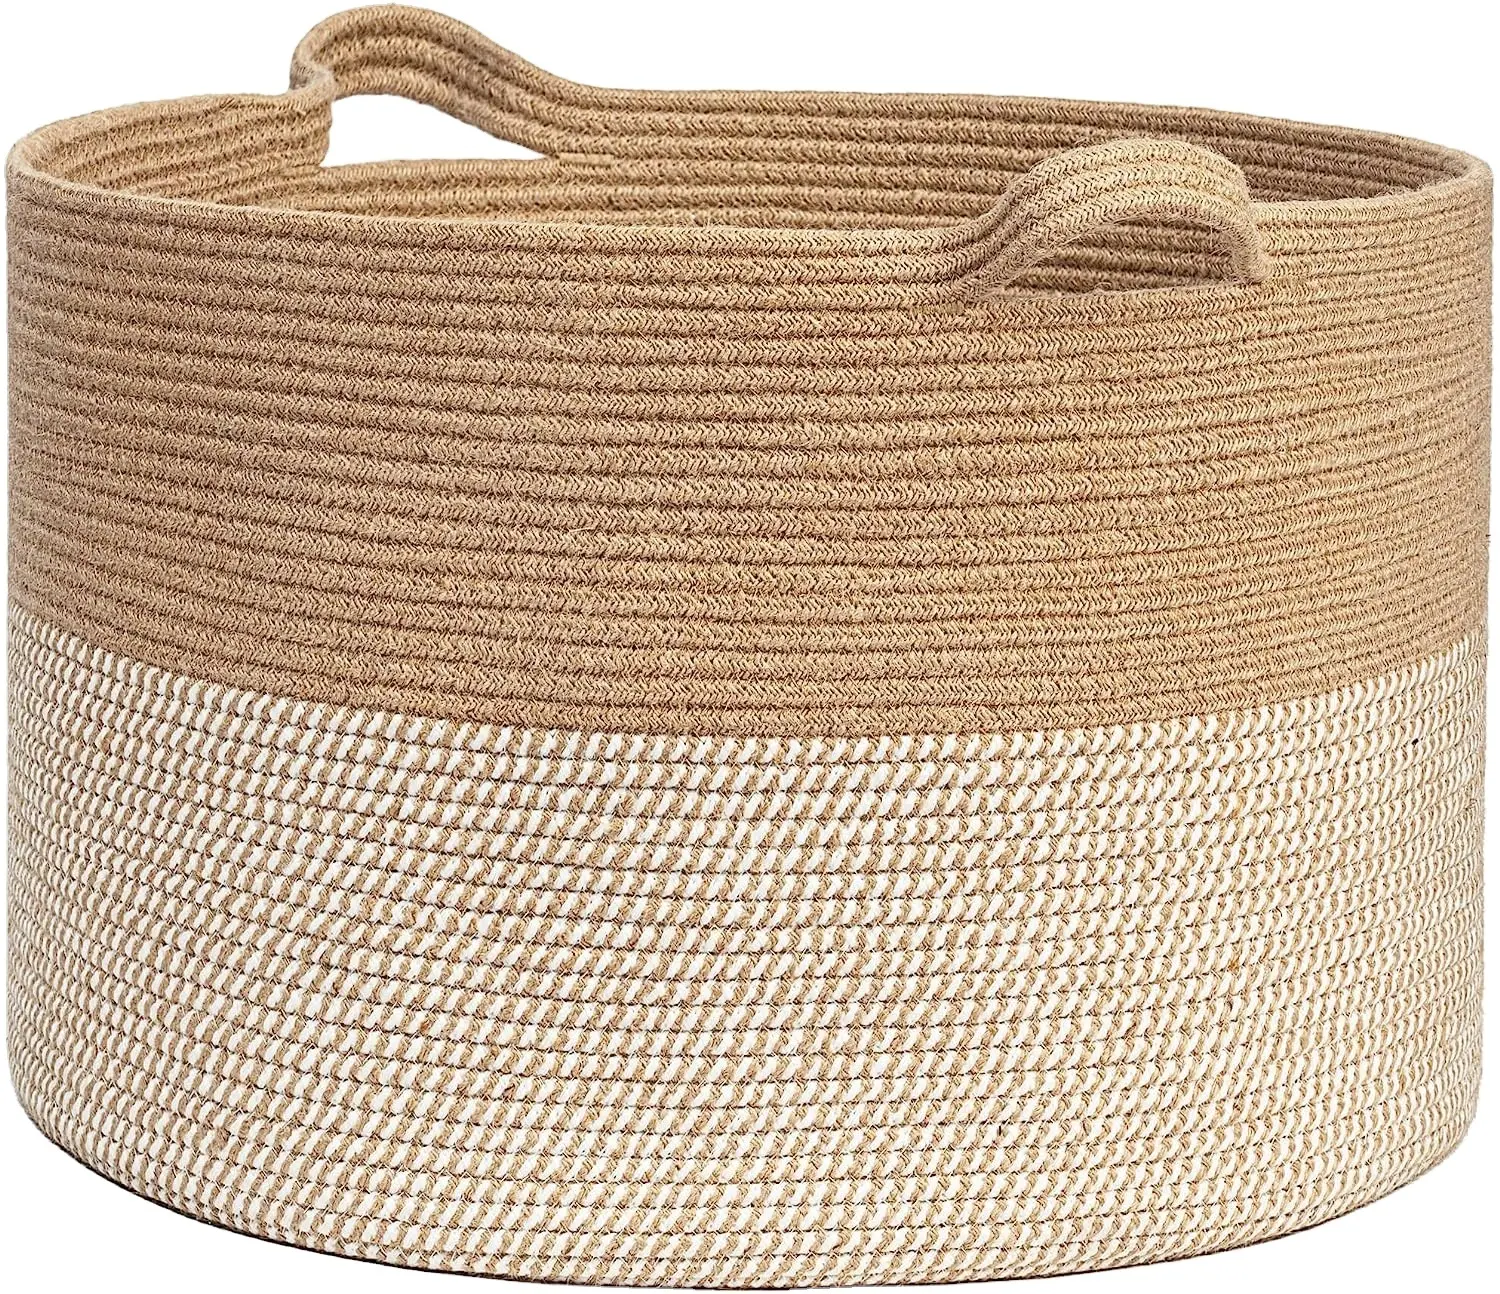 Large Blankets Wicker Basket Big Laundry Baskets Woven Basket with Handle for Clothes Pillows Towel Shoe